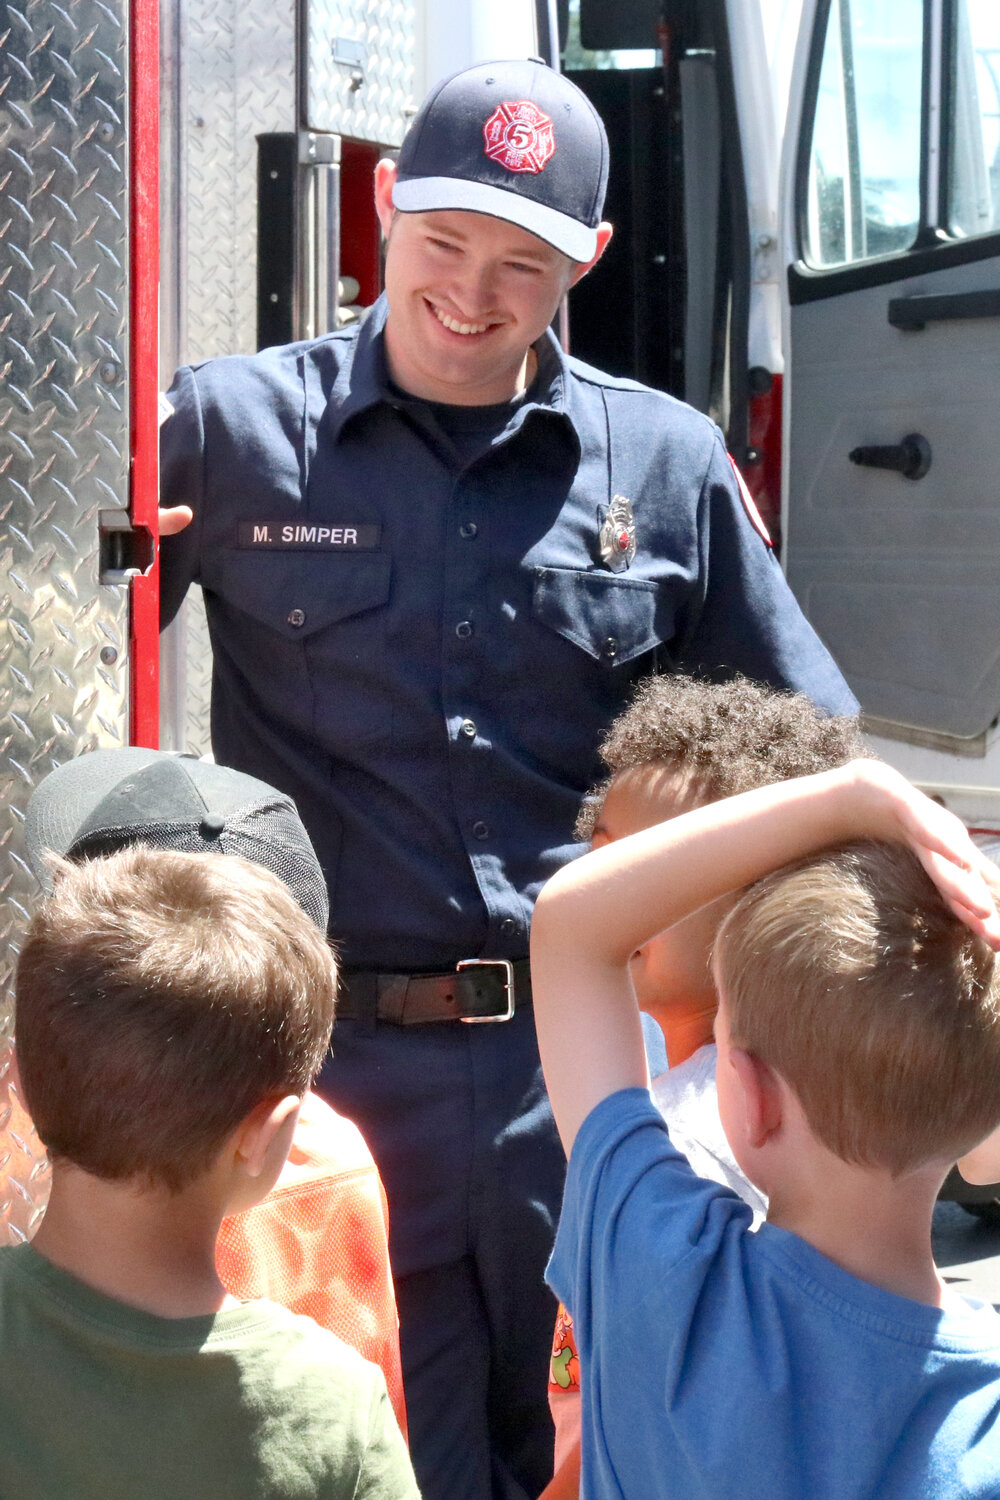 Lewis County District 5 firefighter Malachi Simper gives Napavine Elementary School students a tour of a fire engine outside the fire station in Napavine on Tuesday, June 6.